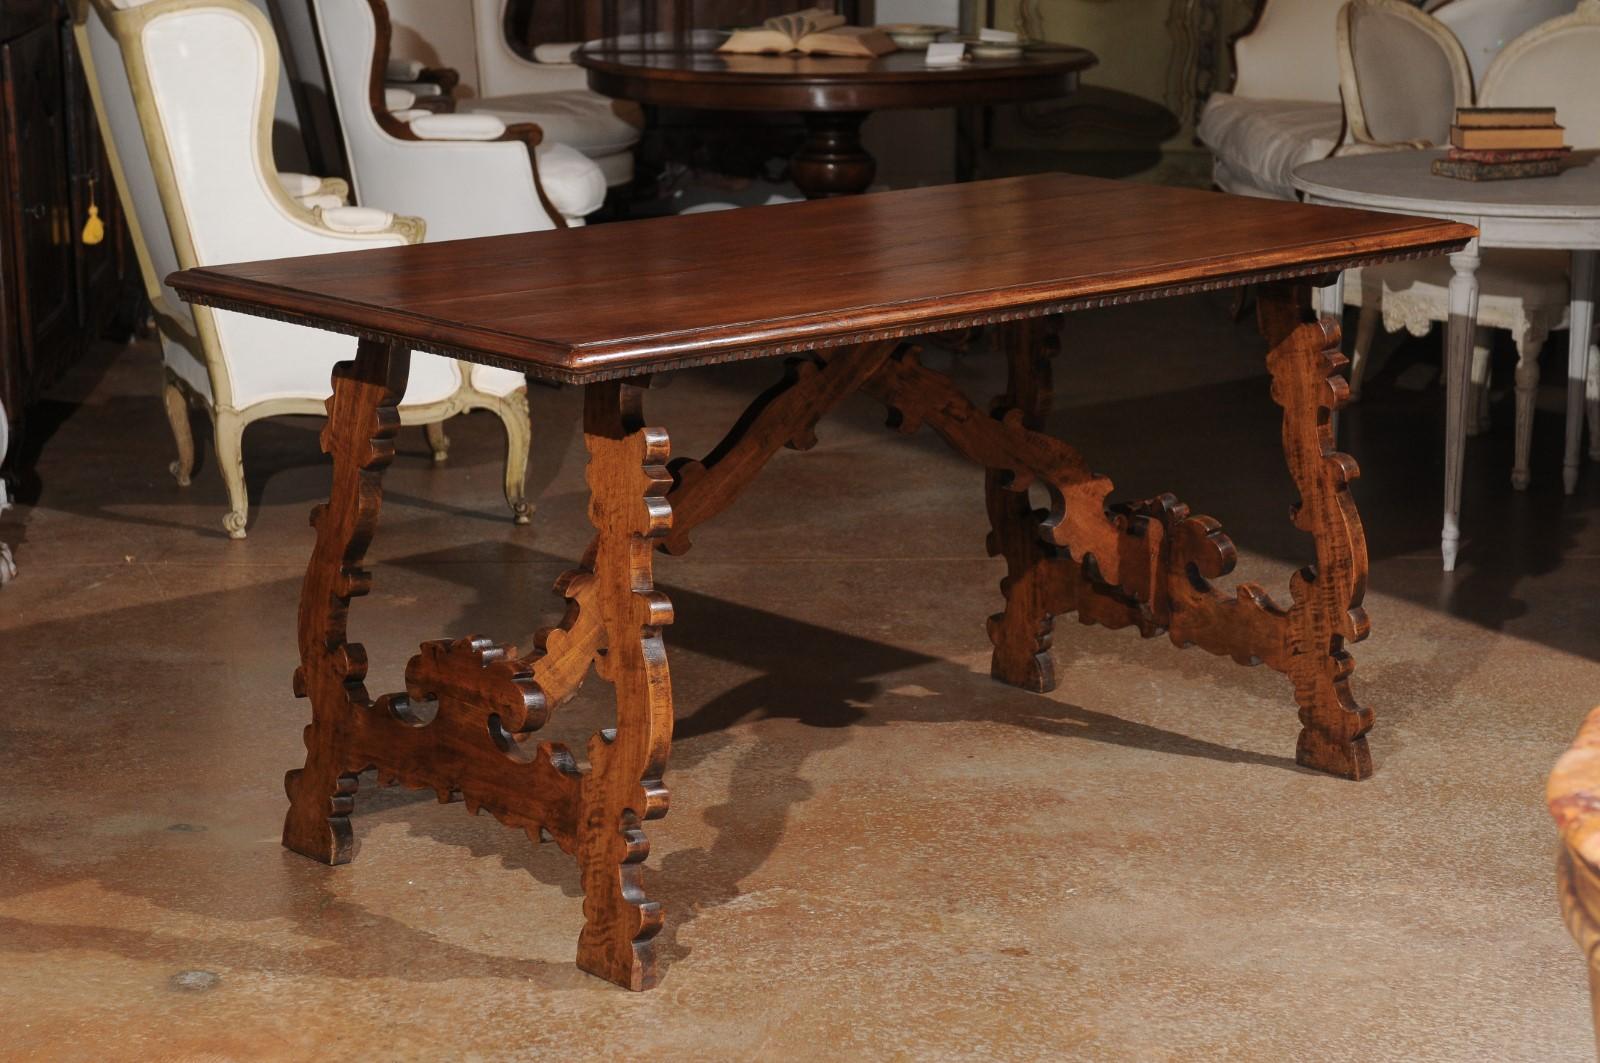 A Spanish Baroque style walnut Fratino table from the 19th century, with carved lyre-shaped legs. Created in Spain during the 19th century, this walnut table features a rectangular planked top adorned with discreet dentil molding on the lower edge,